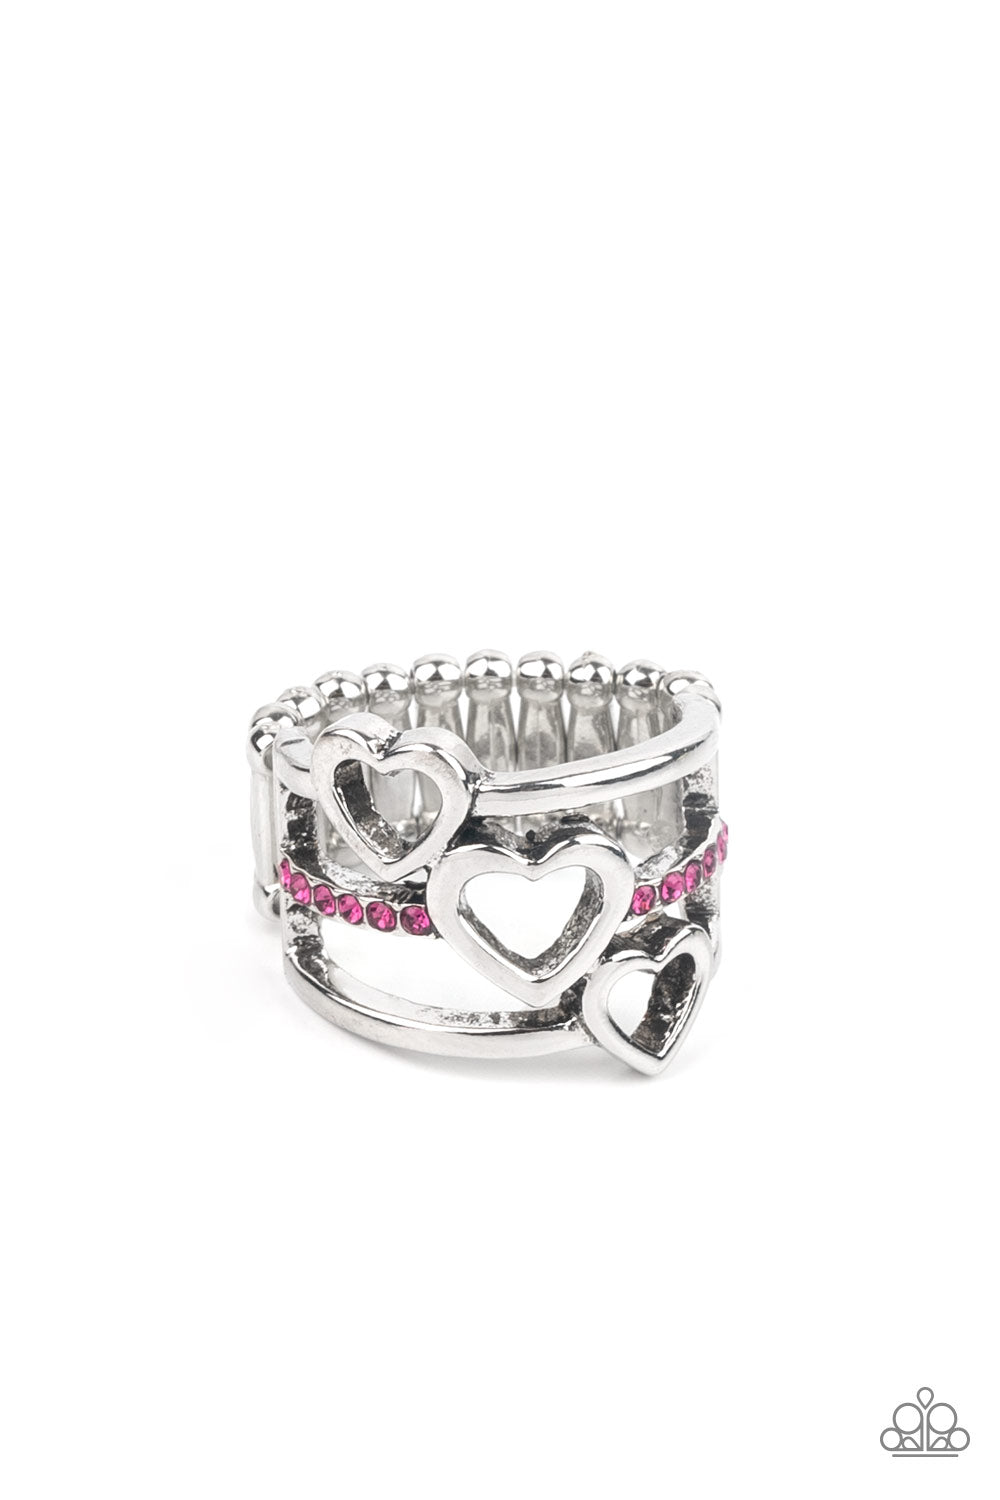 Give Me AMOR - Pink ring 2221